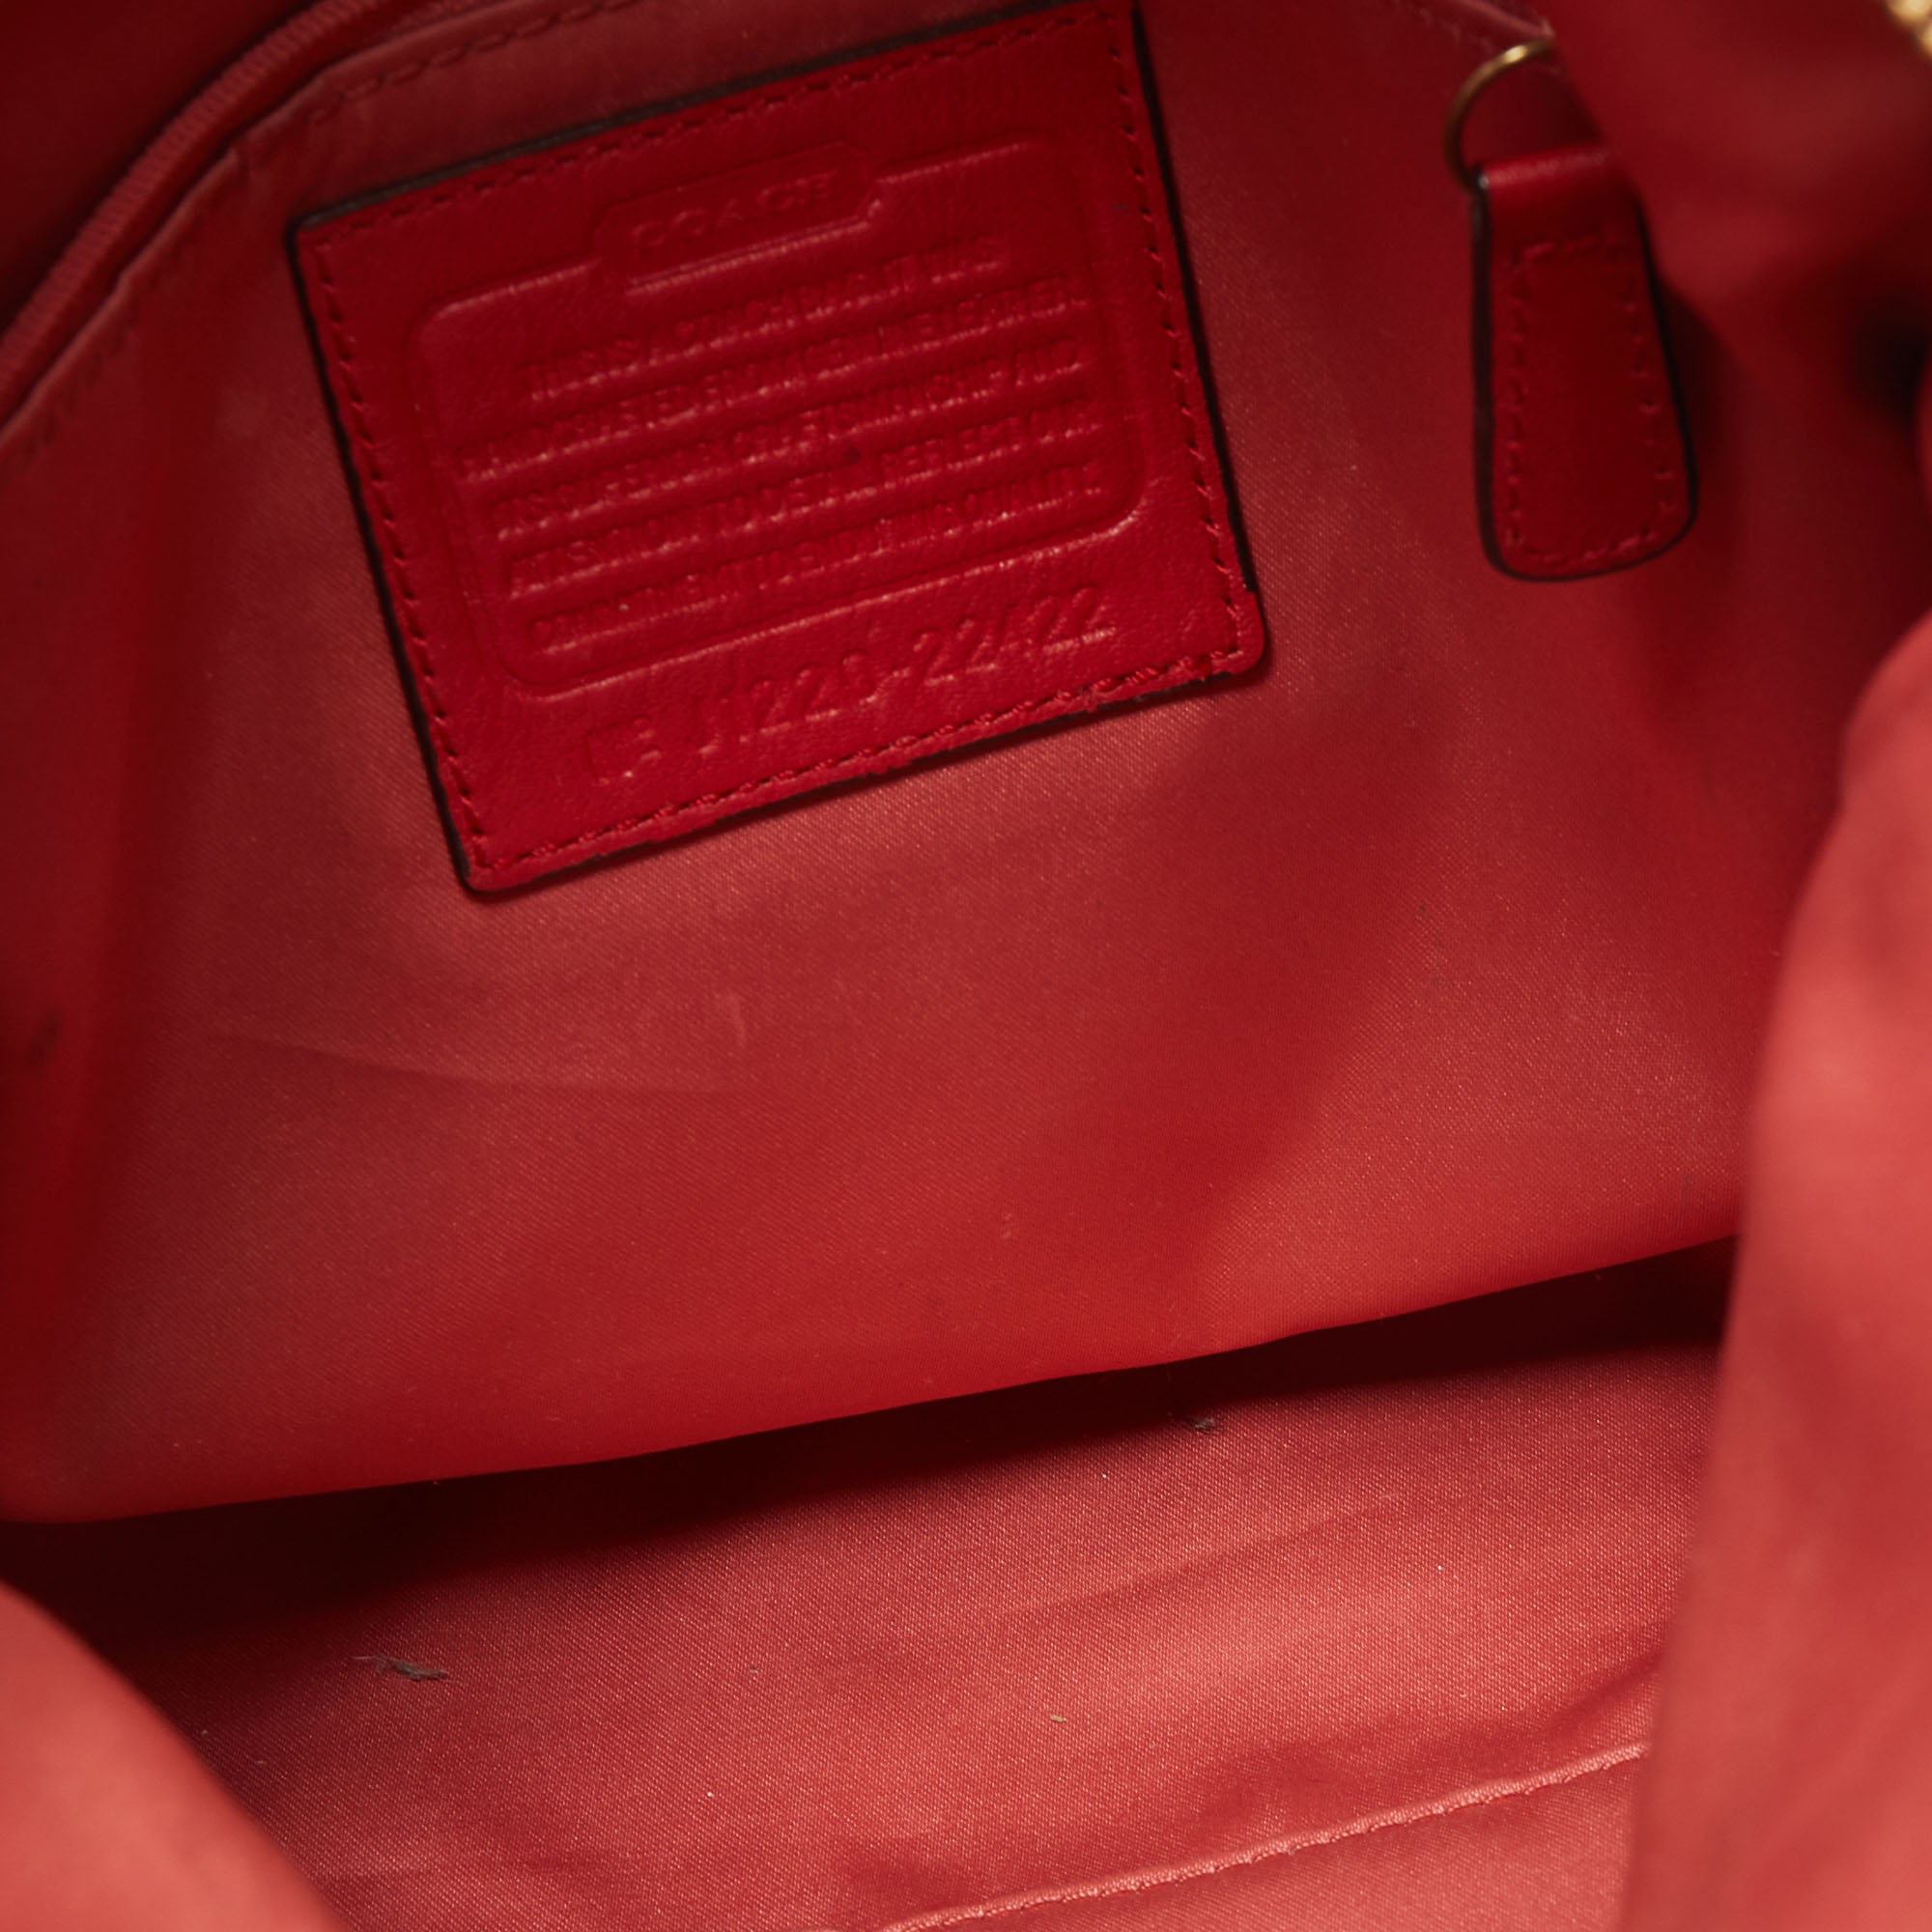 Coach Red Leather Front Zip Tote